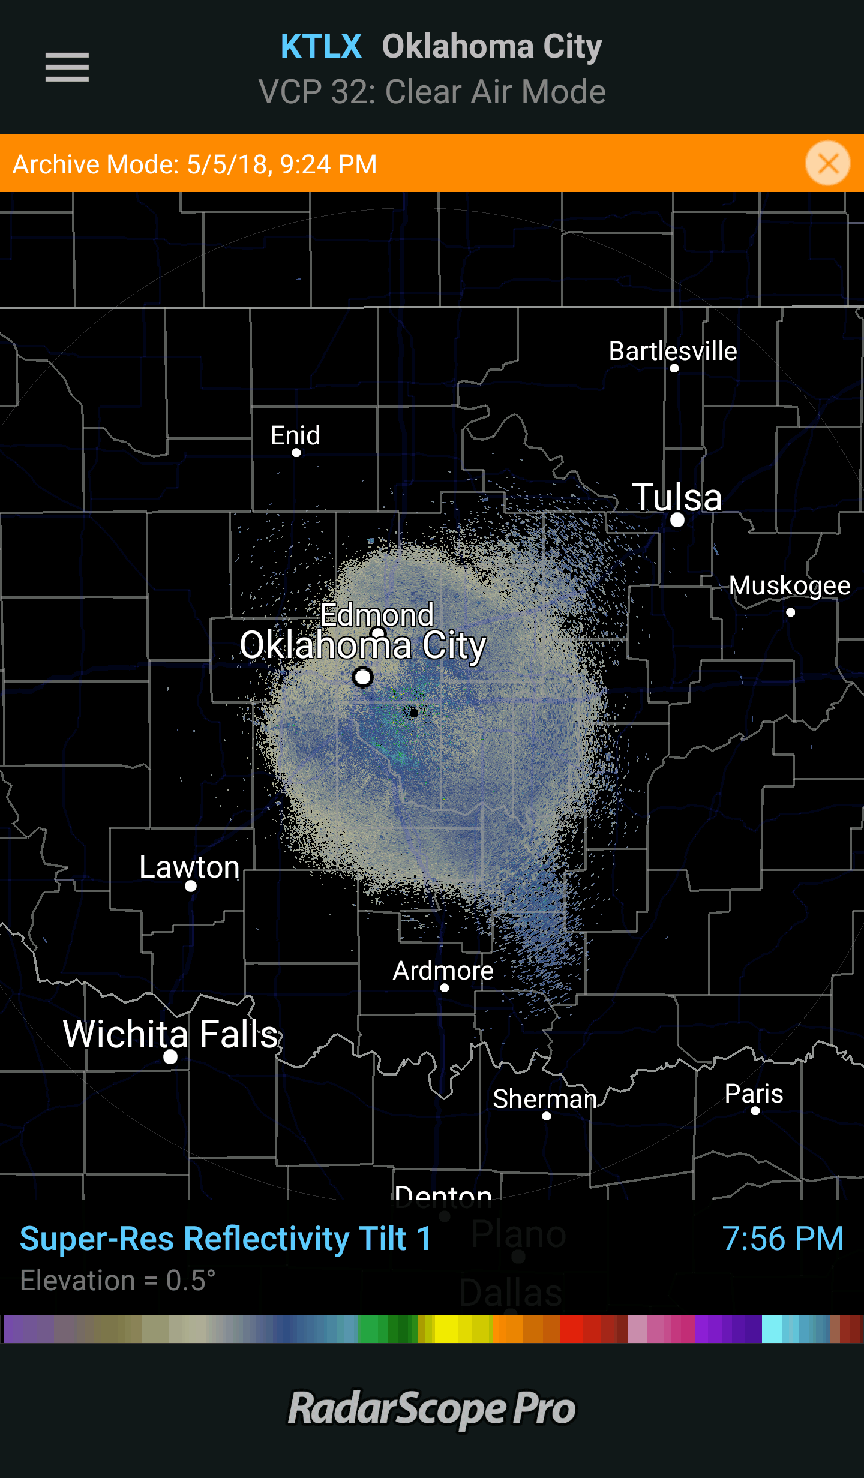 A rapid increase of reflectivity after sunset commonly referred to as “bloom.”